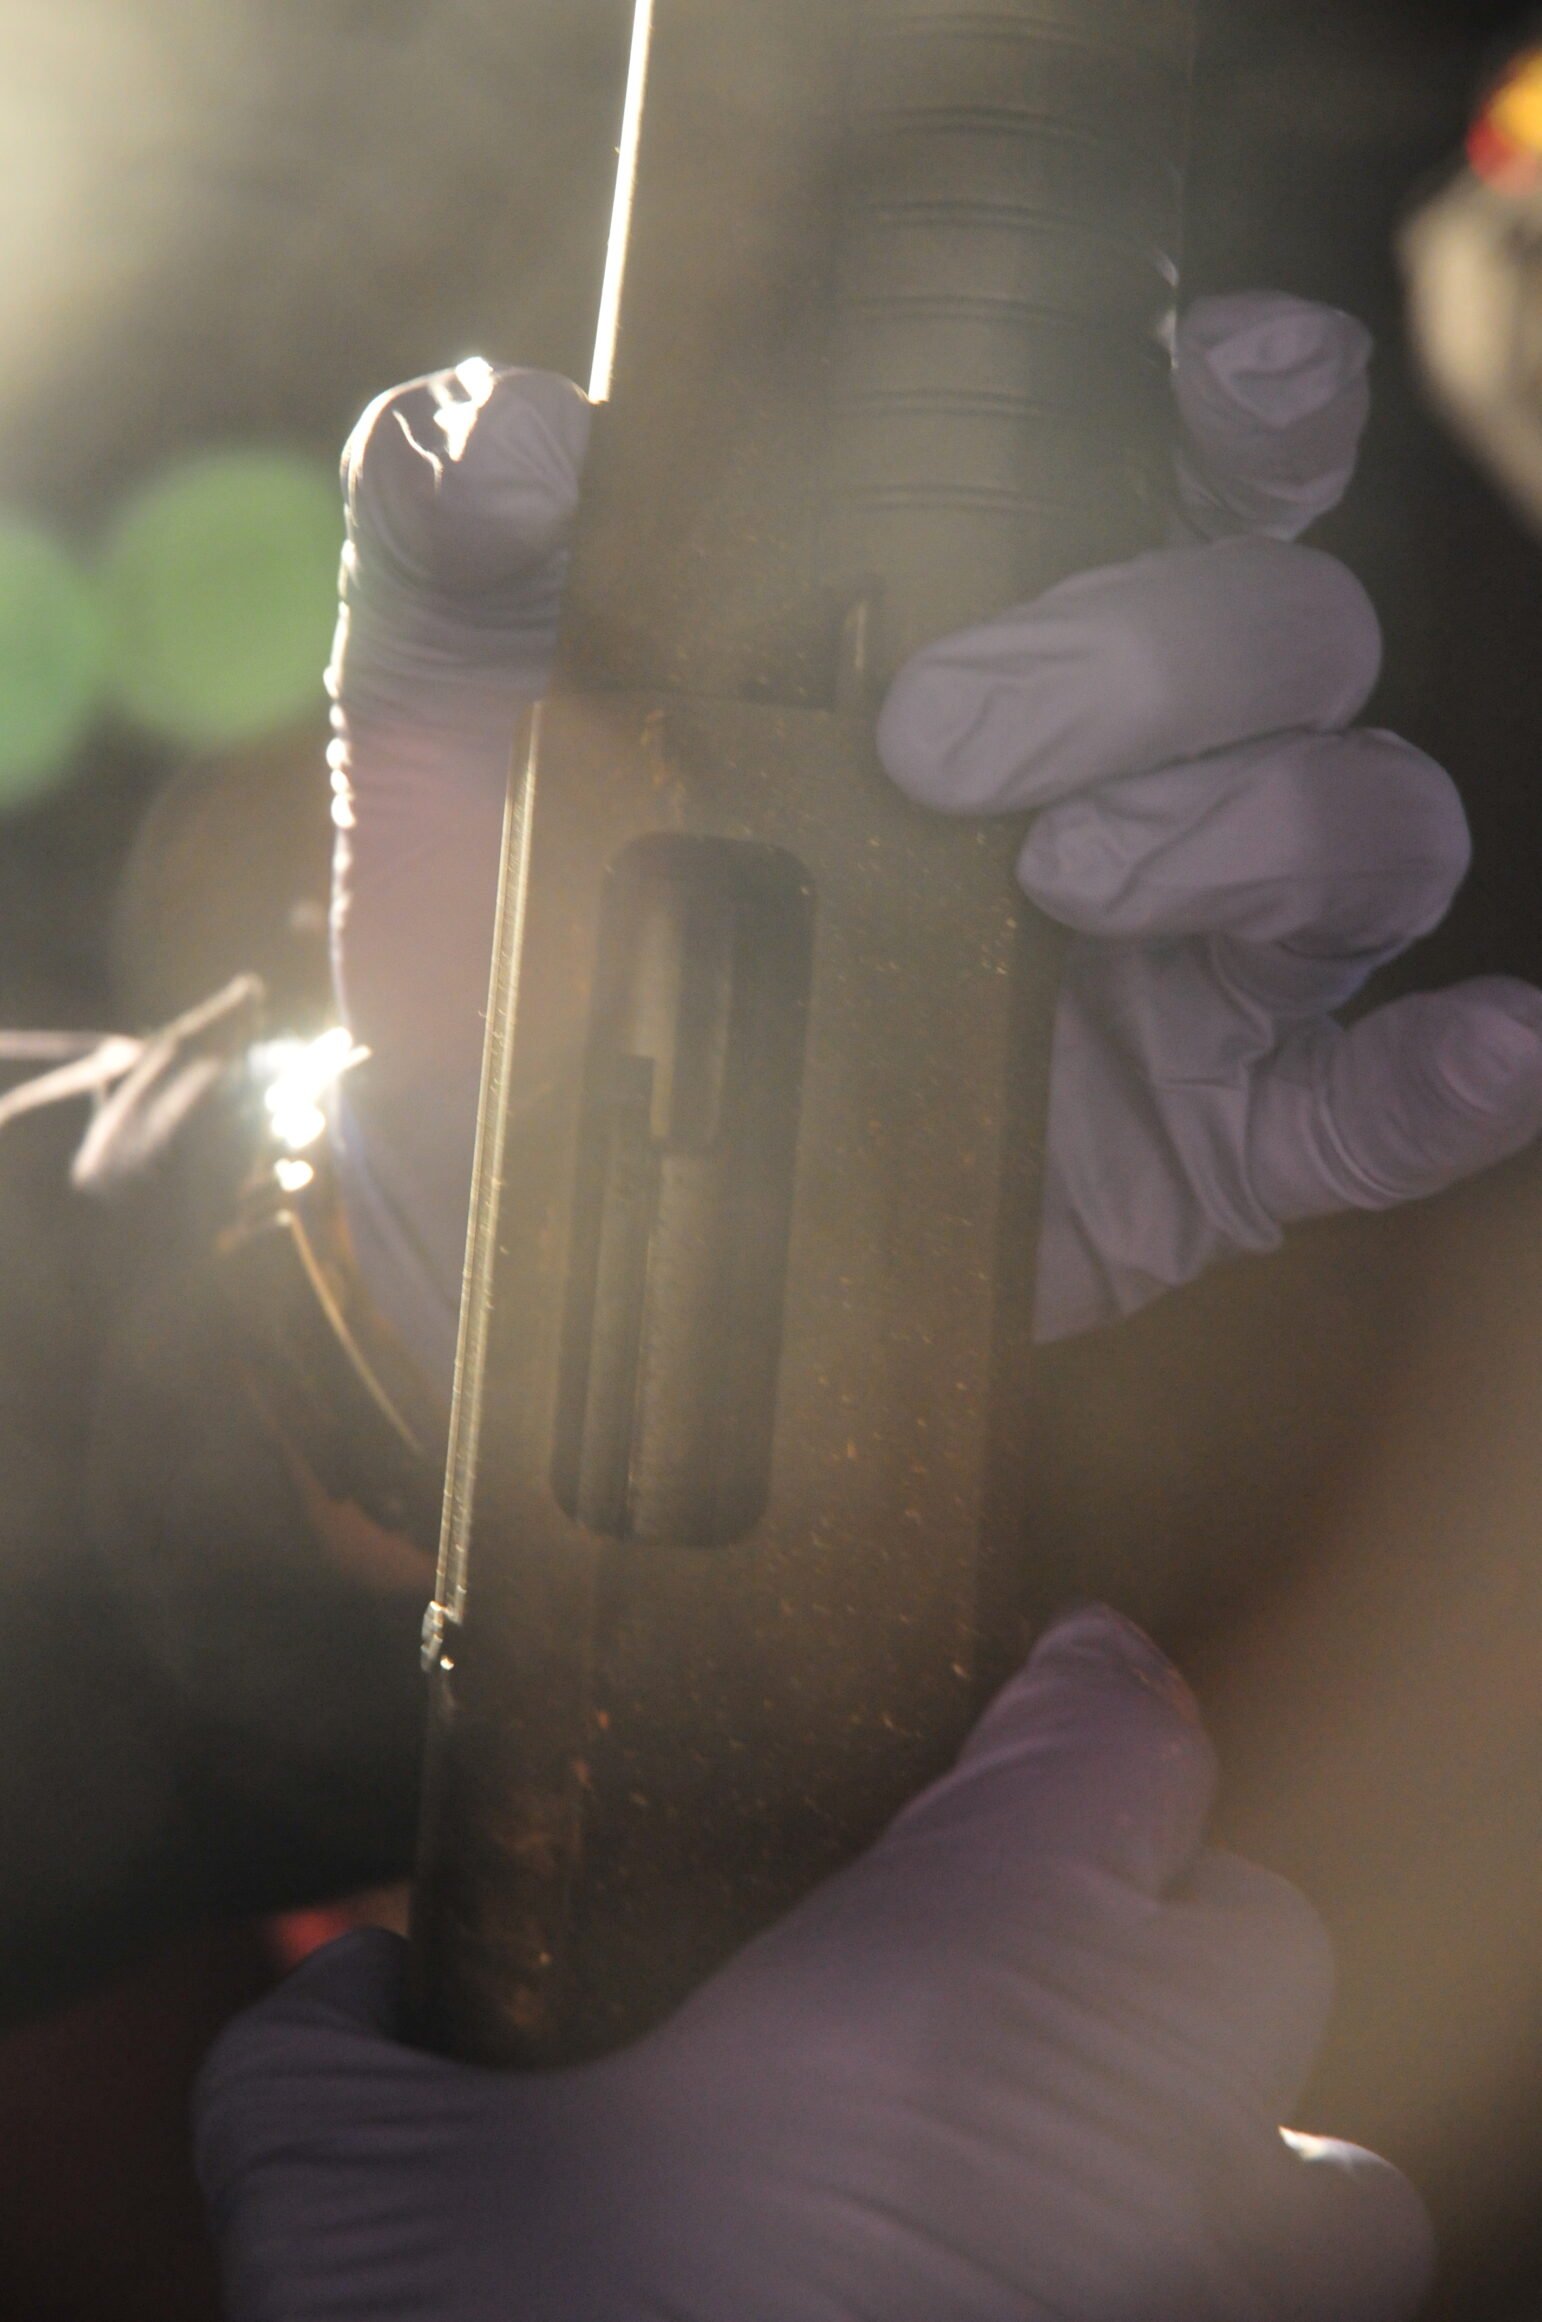 A close-up shot of a person's purple nitrile-gloved hands holding a shotgun vertically as light spills around the edges of the image.